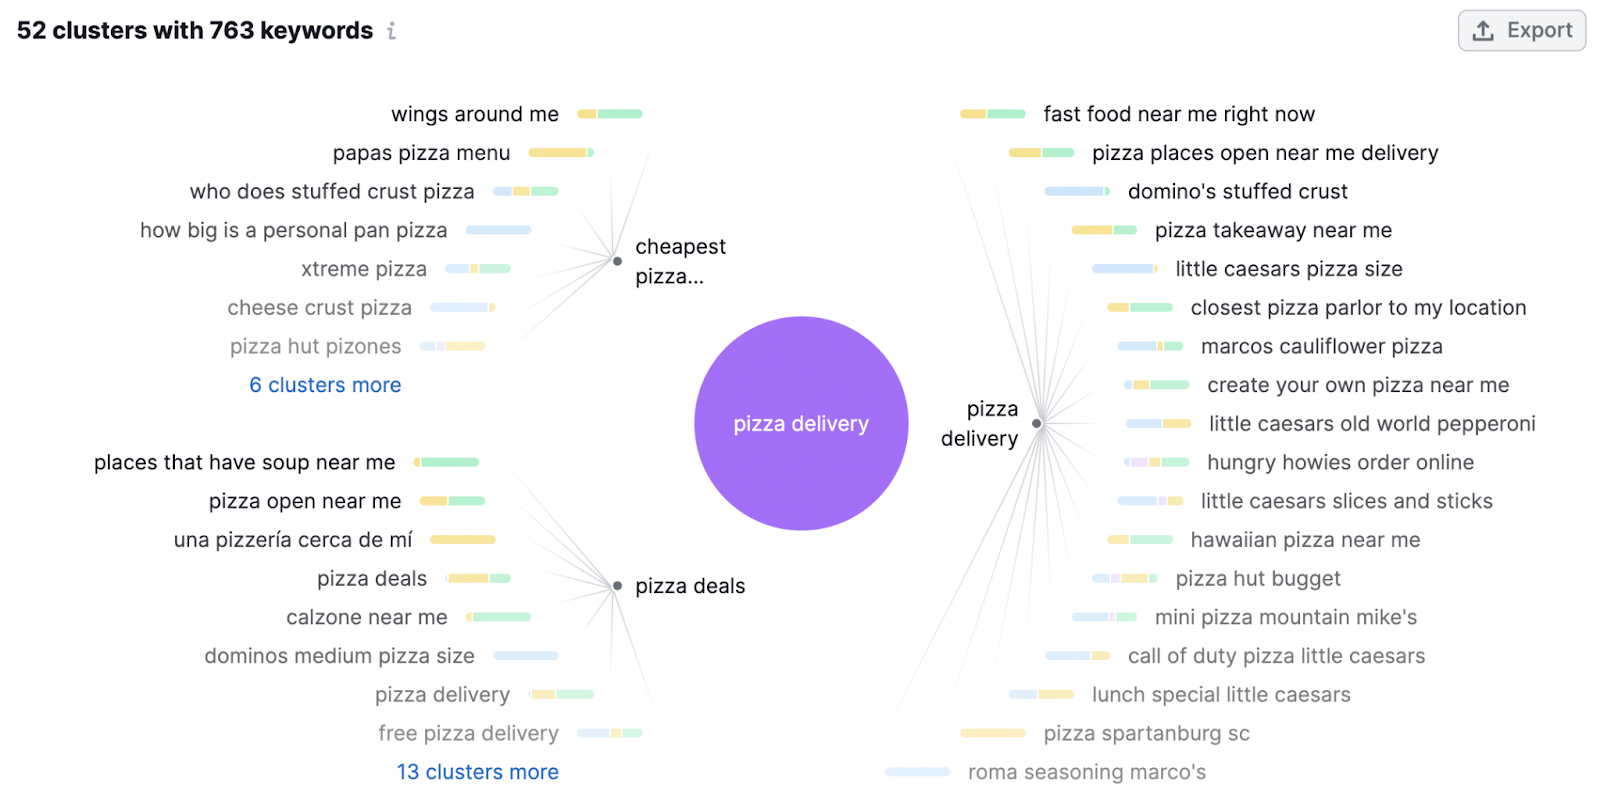 A mind map for "pizza delivery" keyword